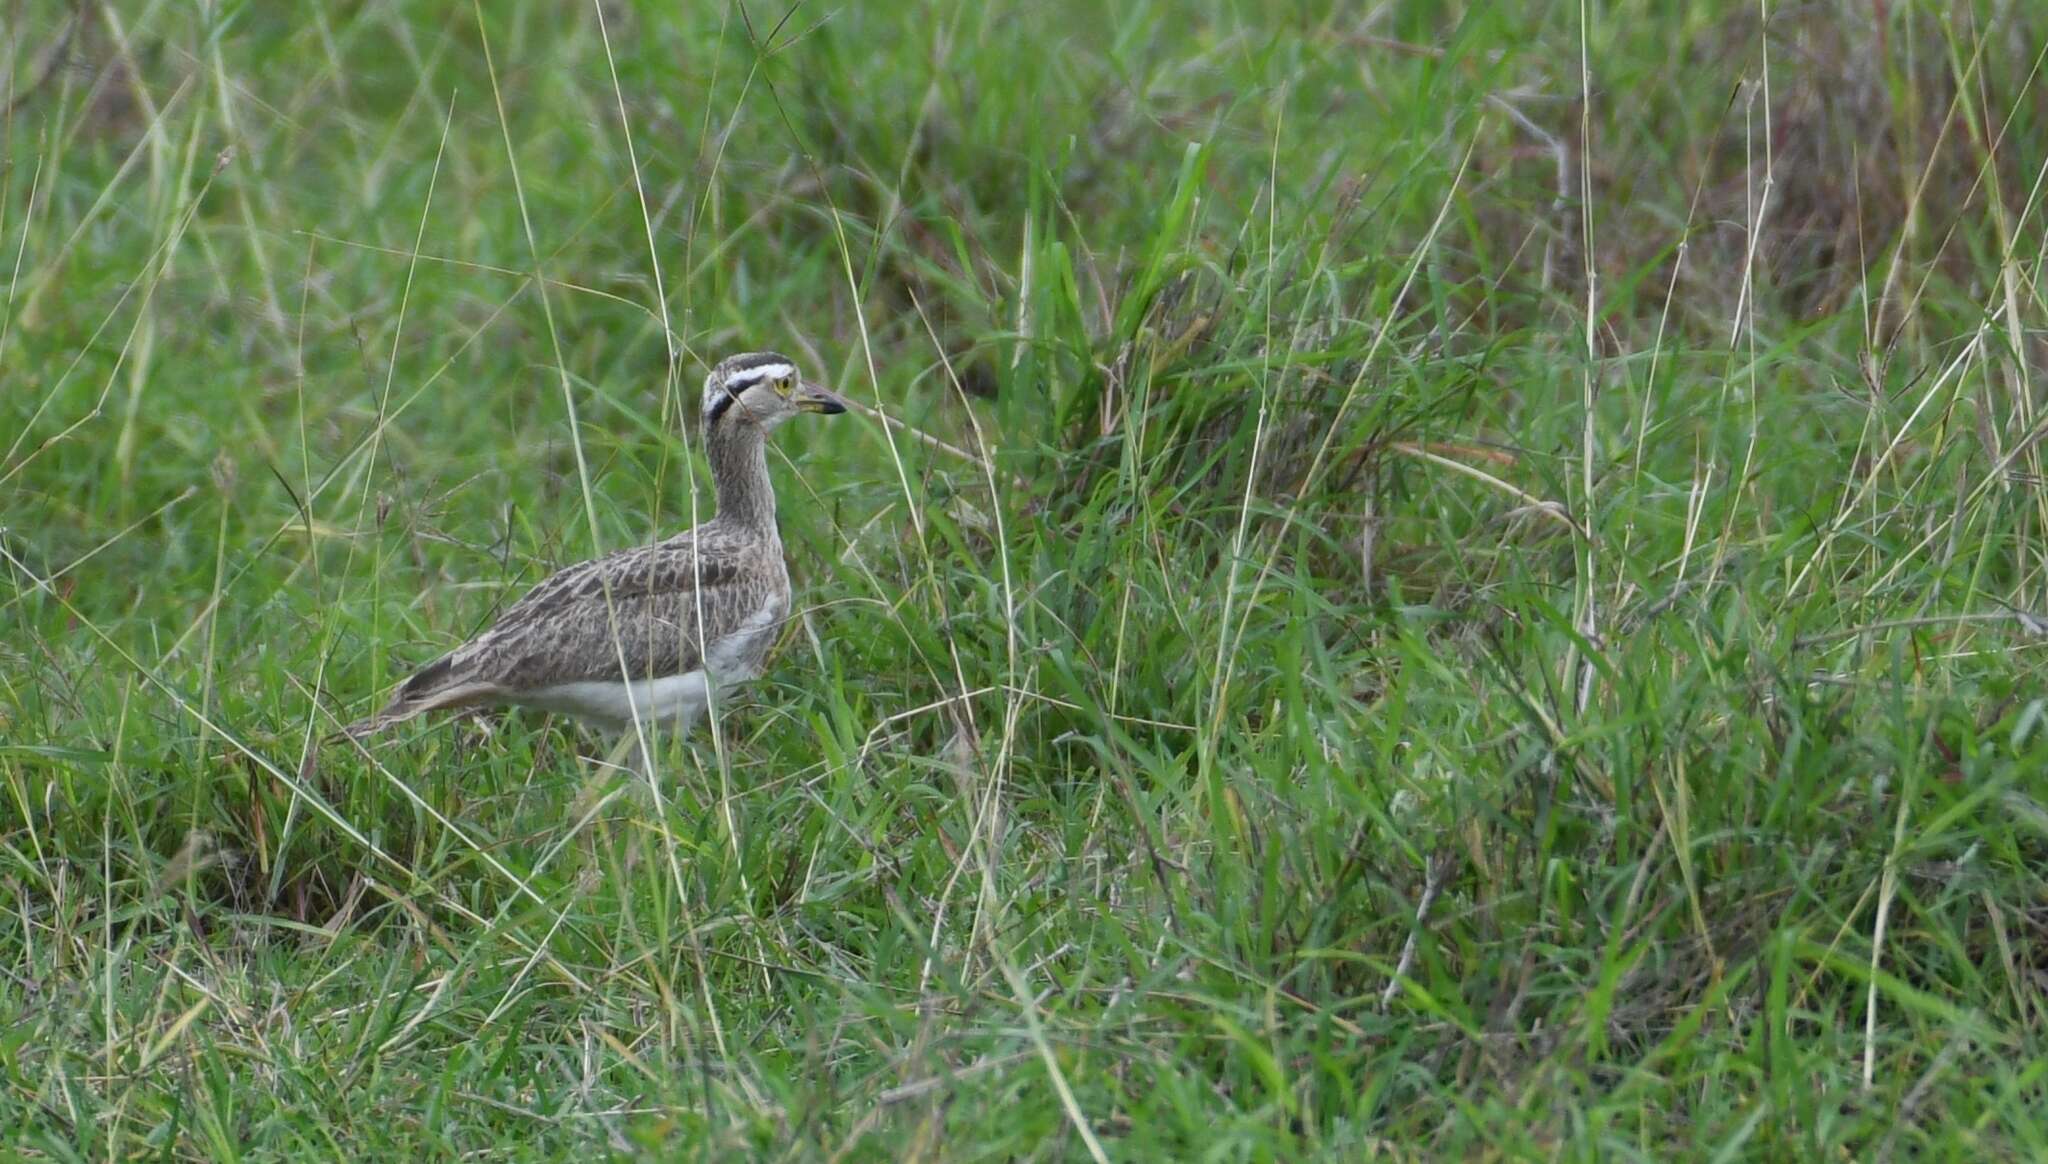 Image of Double-striped Thick-knee